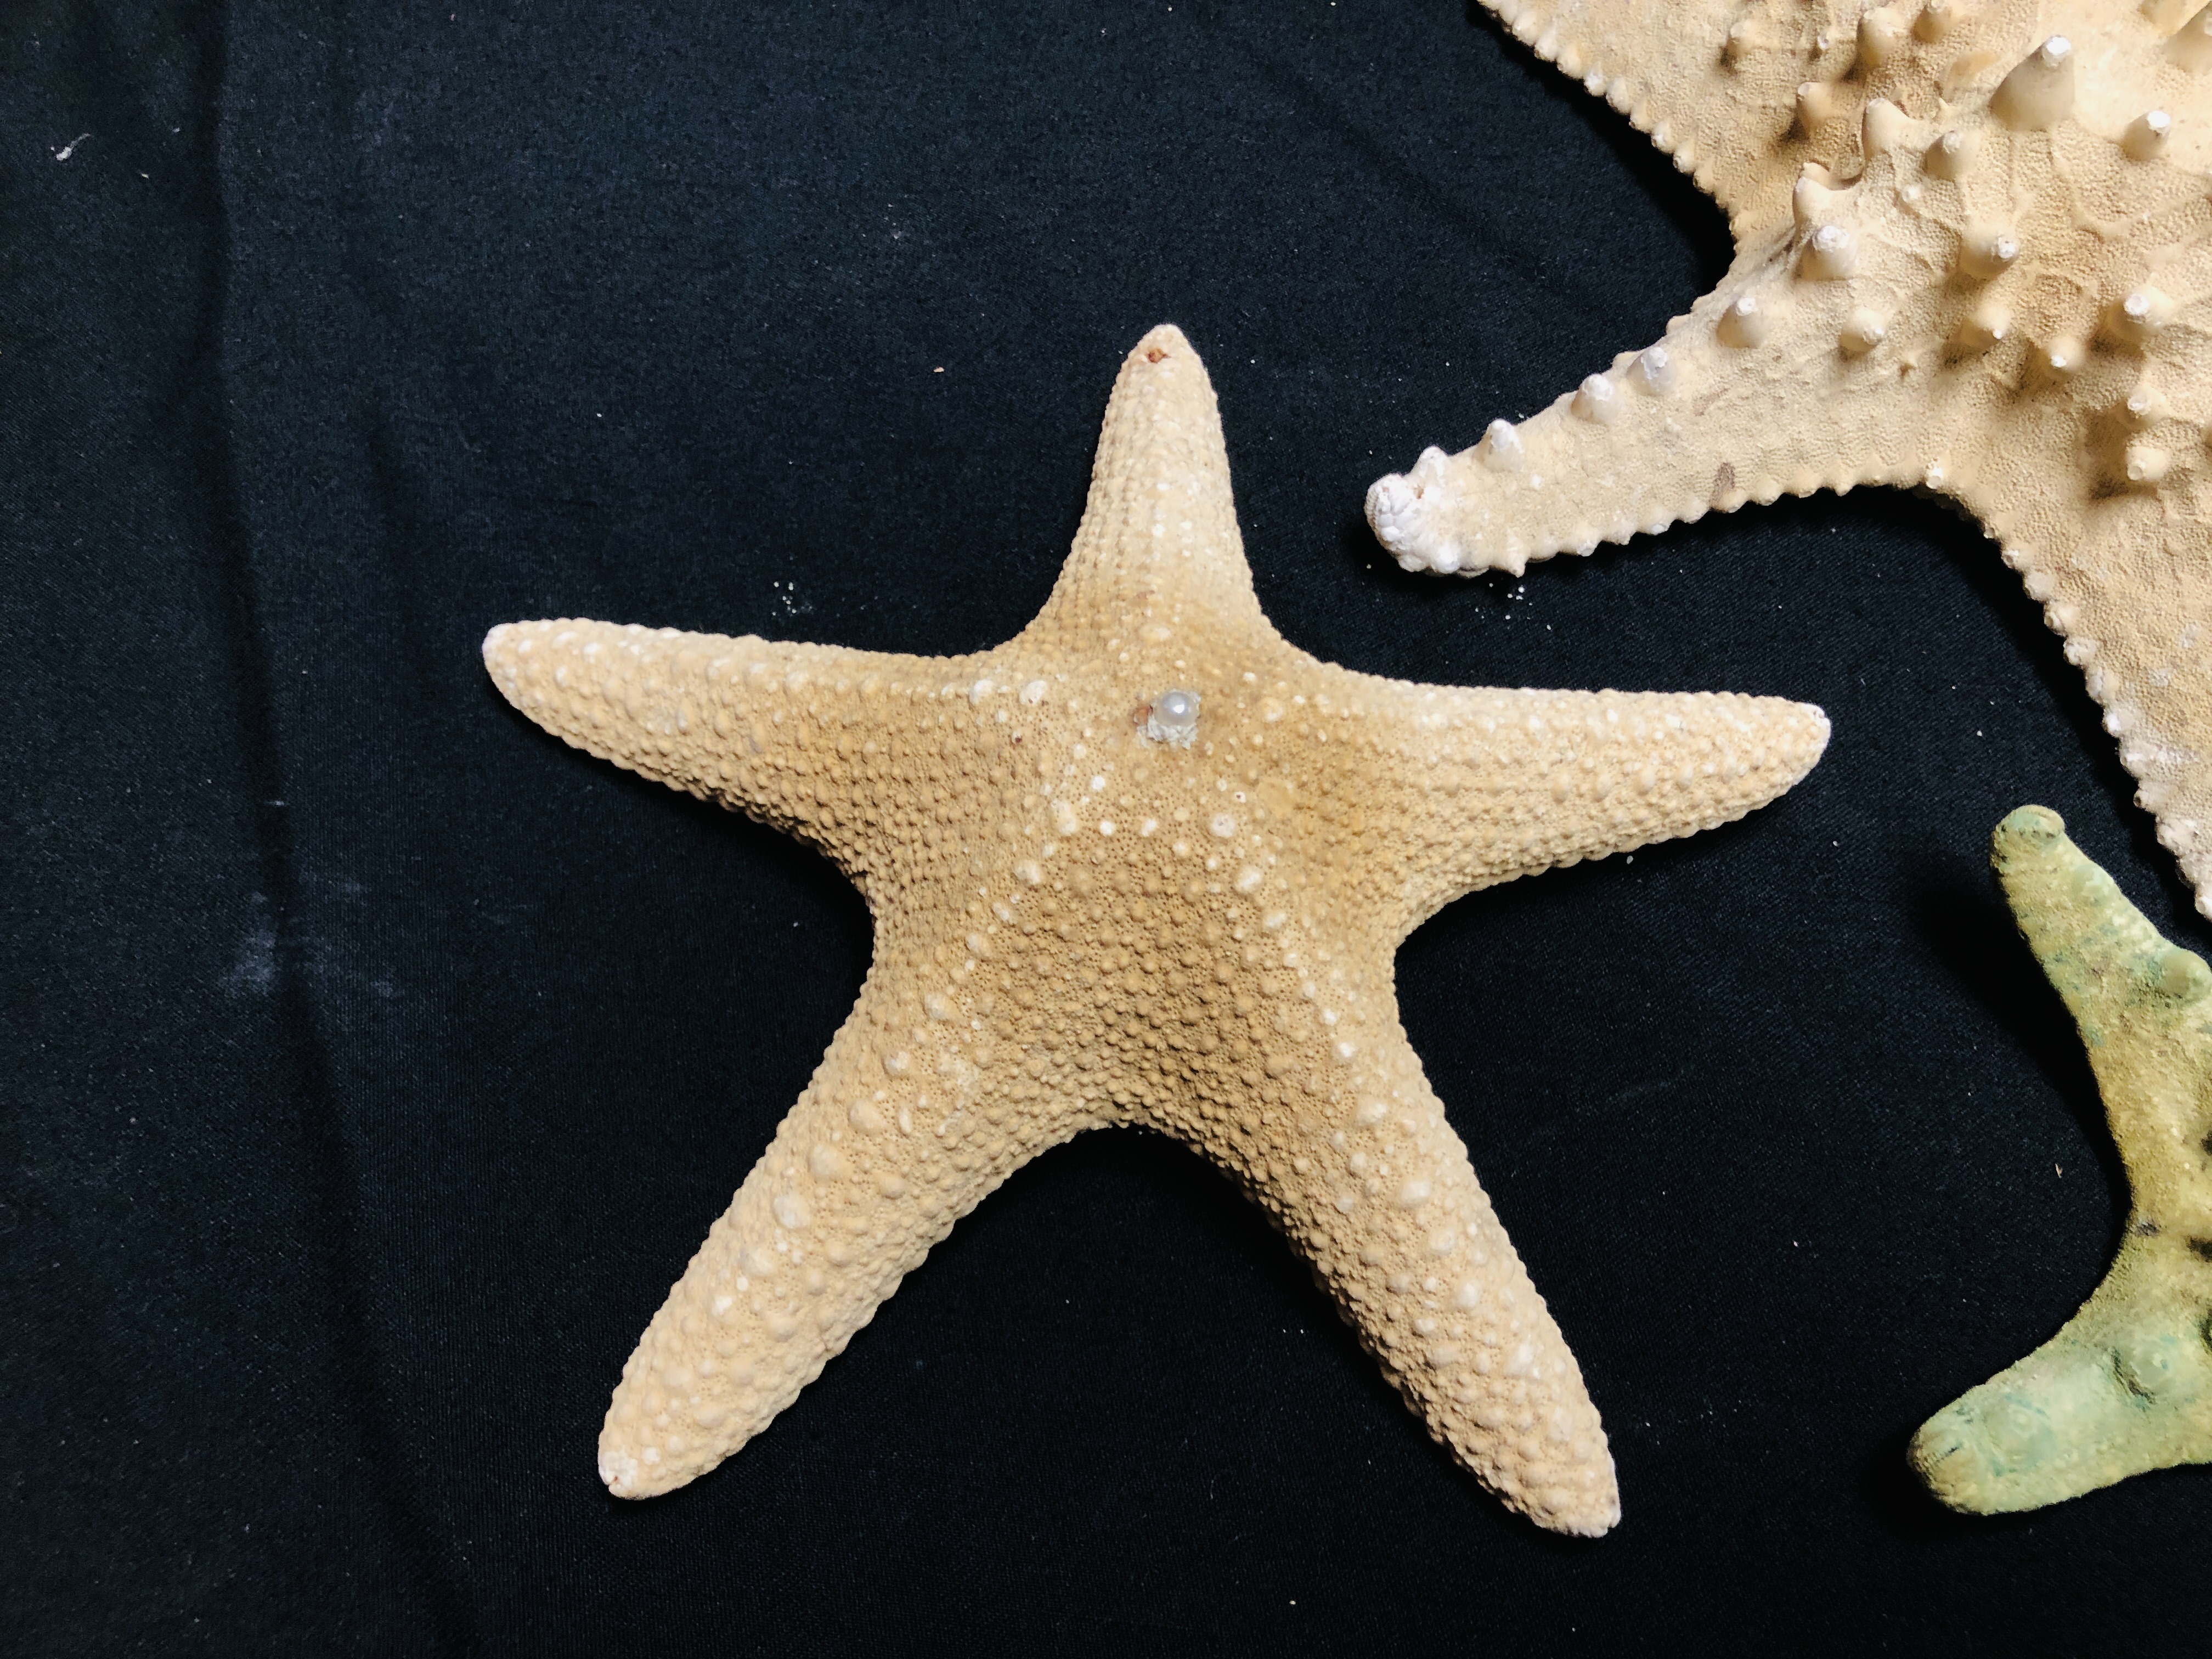 A GROUP OF 5 STARFISH, VARIOUS SIZES AND SPECIES. - Image 5 of 5